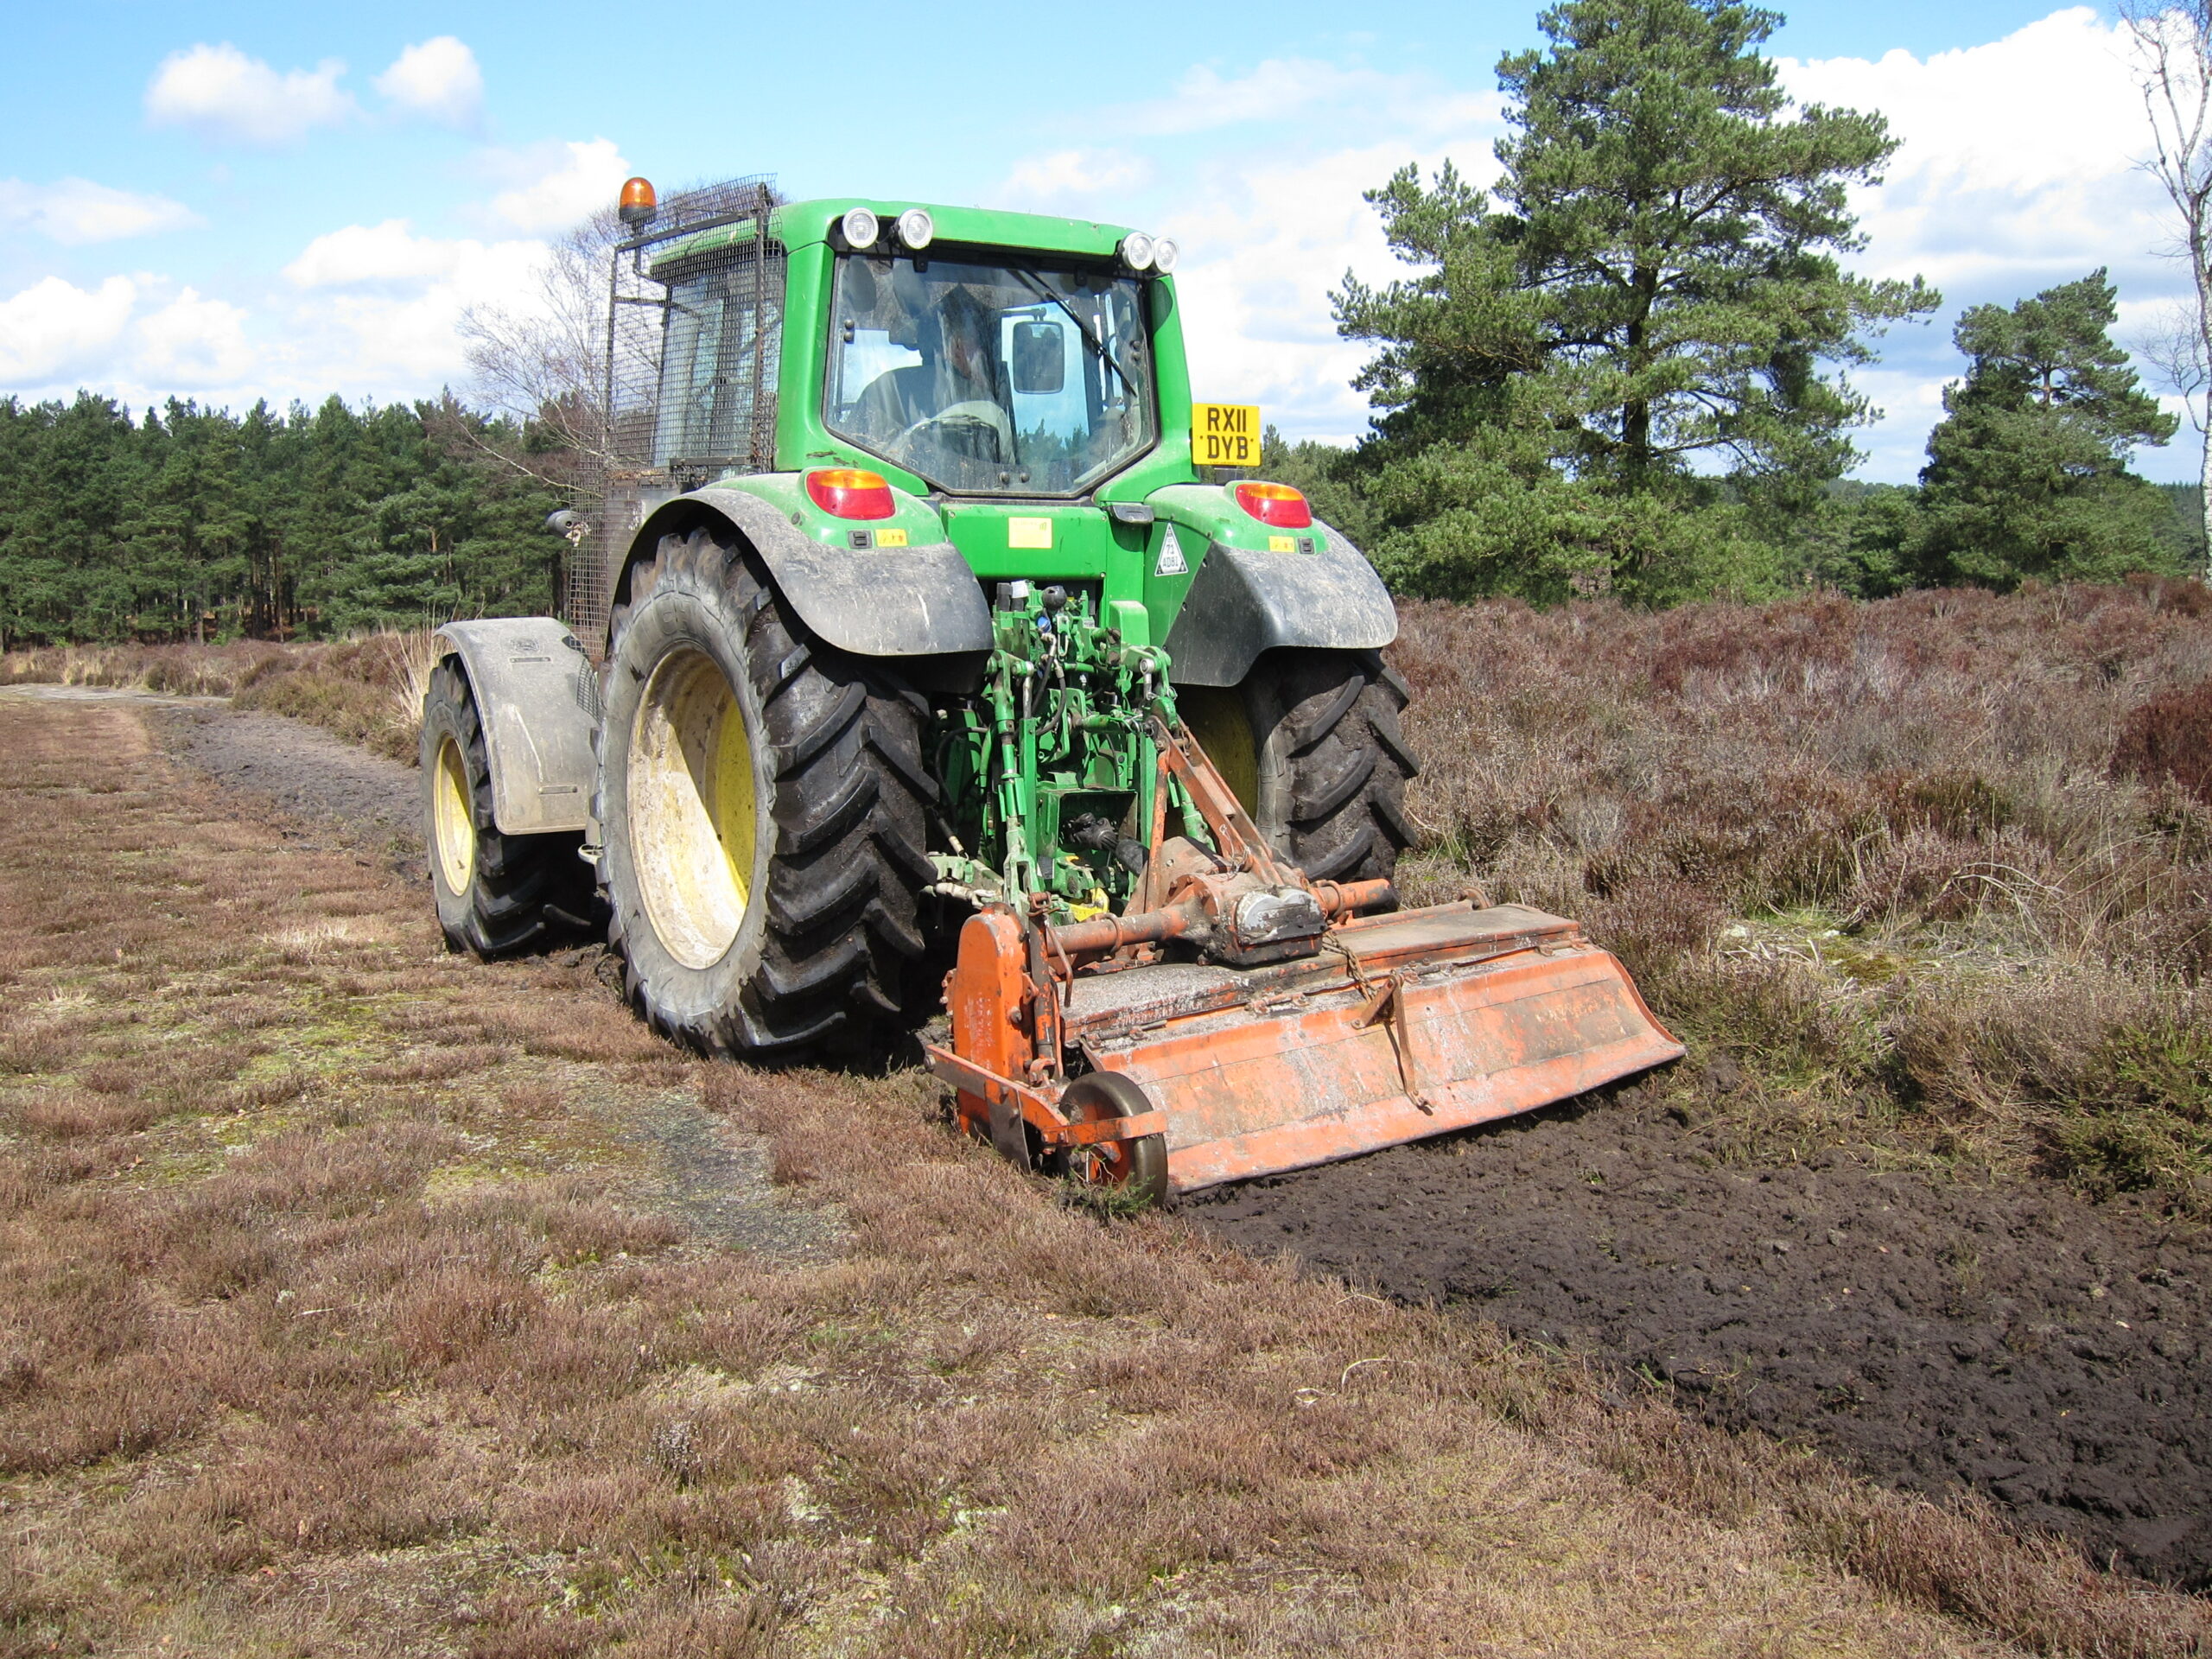 A green tractor ploughing a field as part of a reserve management programme.